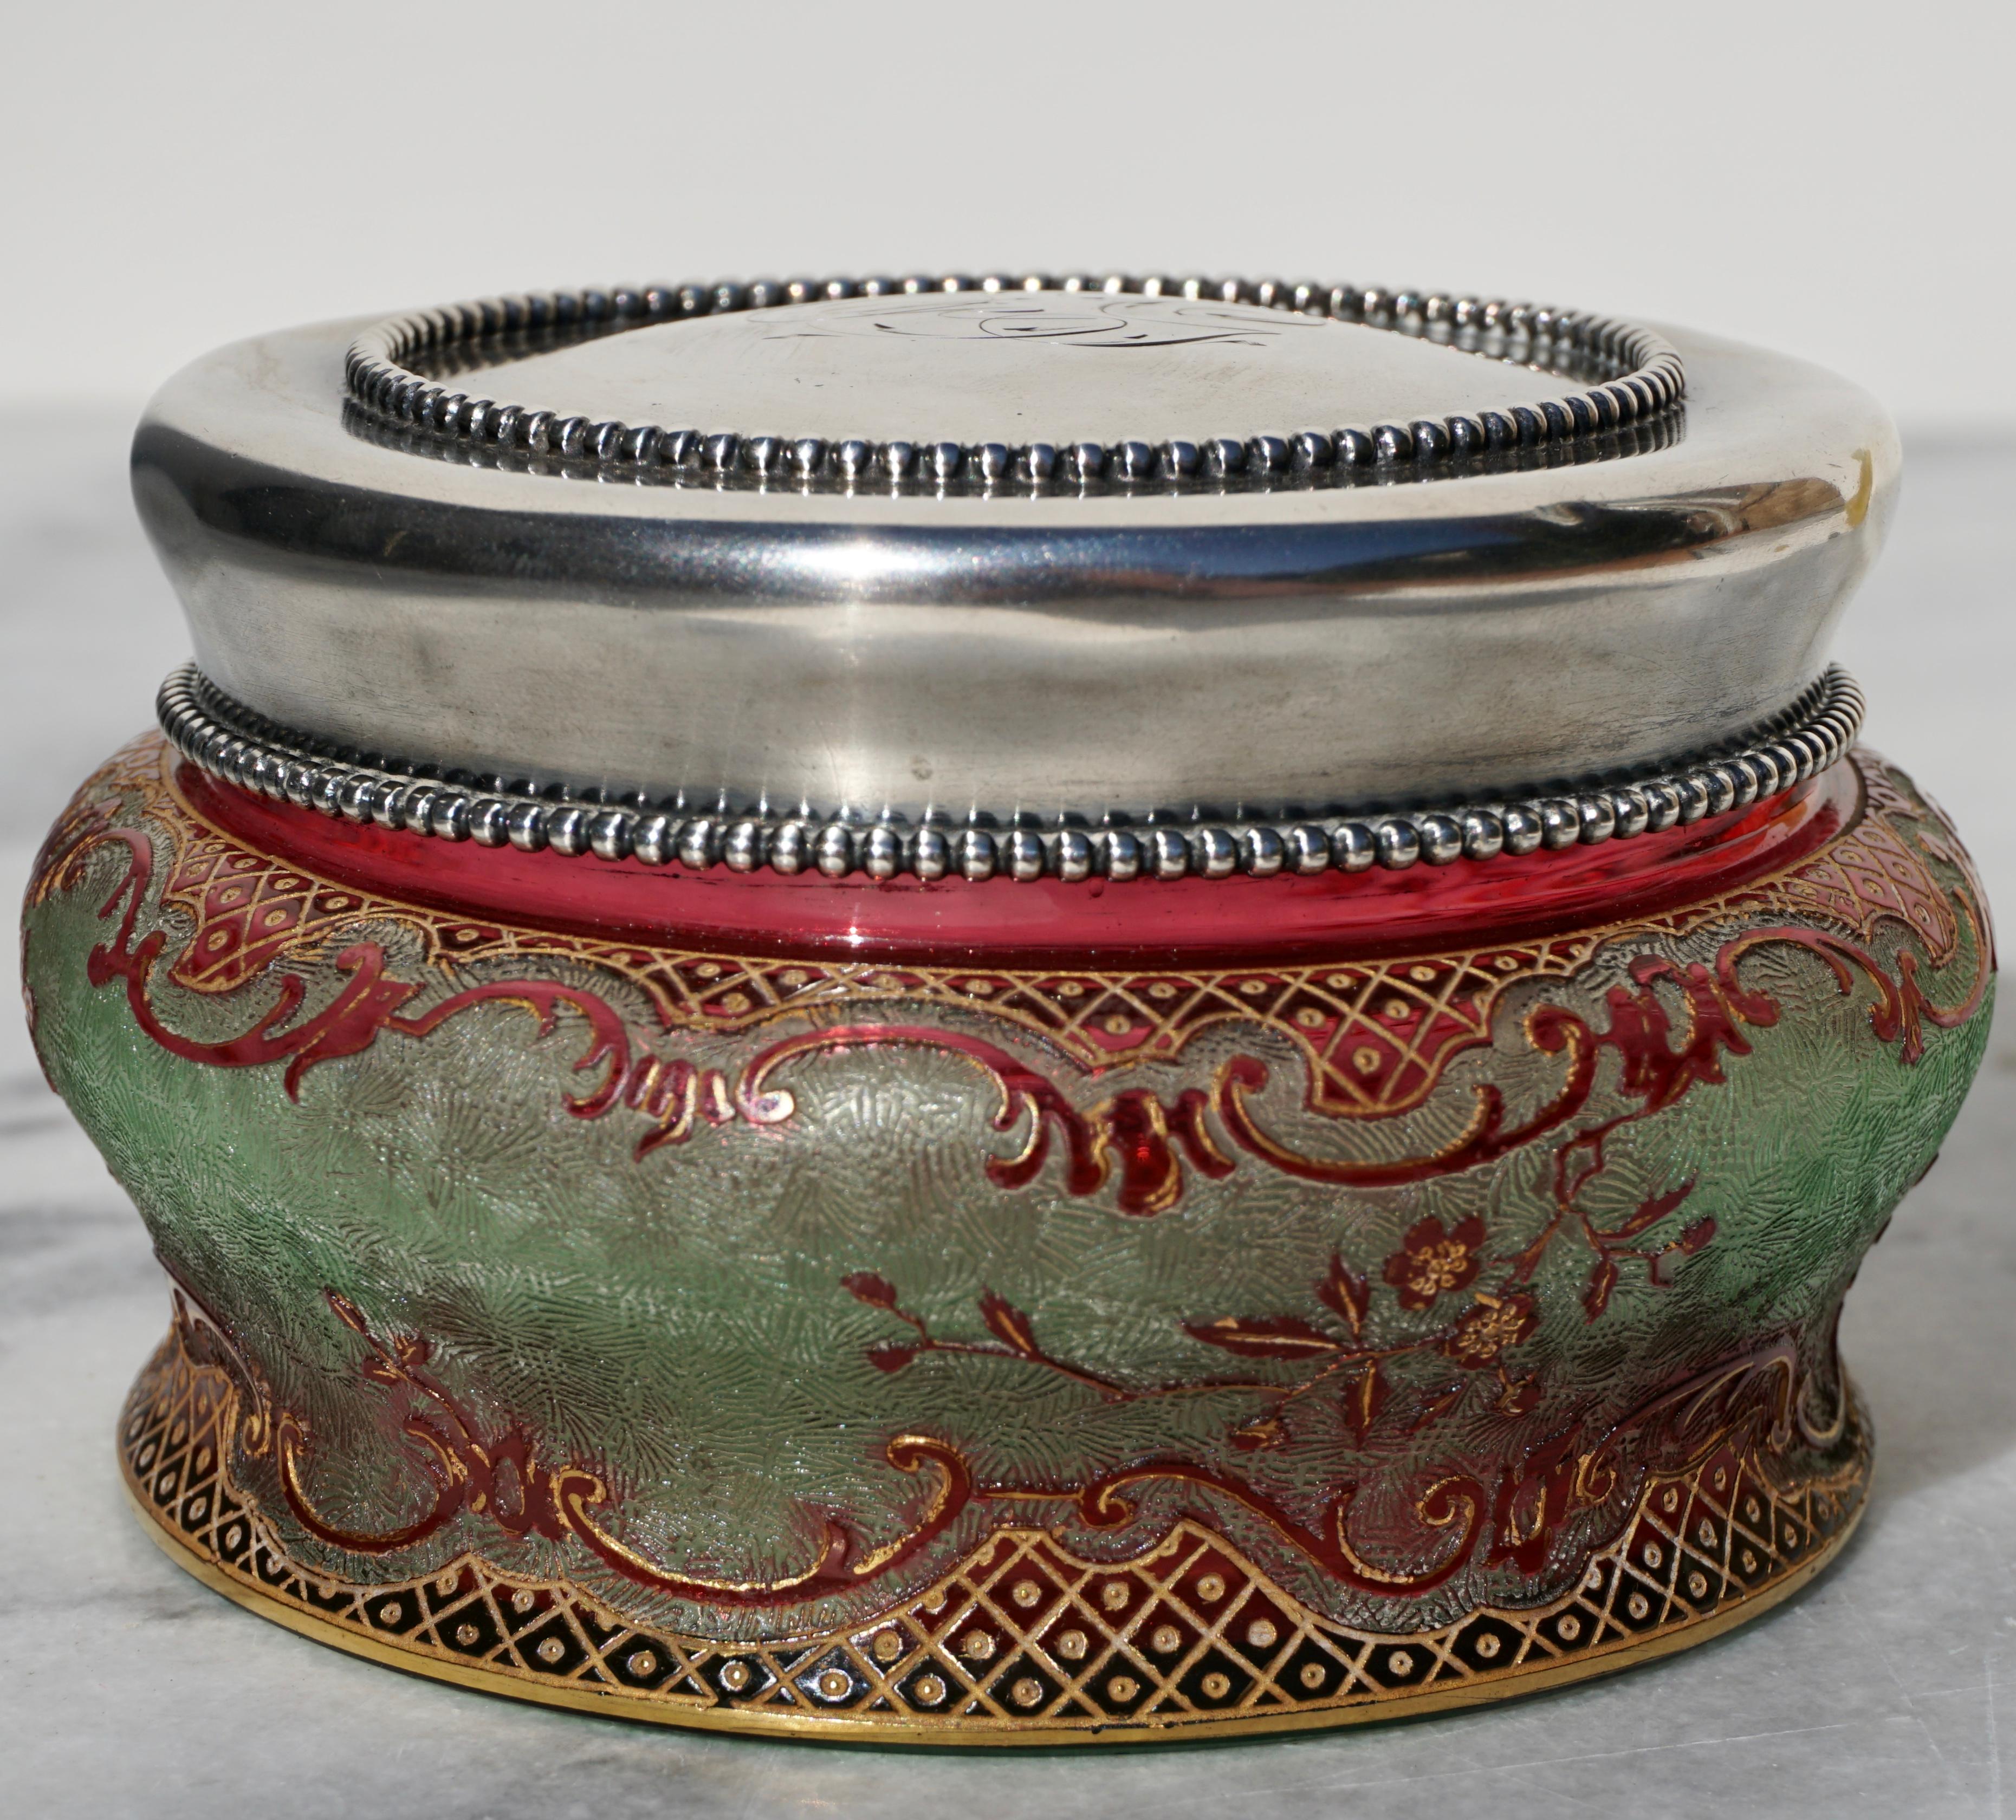 Baccarat Cameo Art Nouveau silver lidded crystal powder box. With a sterling silver monogrammed lid. This green and red overlay glass was carved, acid etched, enameled and gold gilt. Polished Pontic with Baccarat France depose acid etched on bottom.